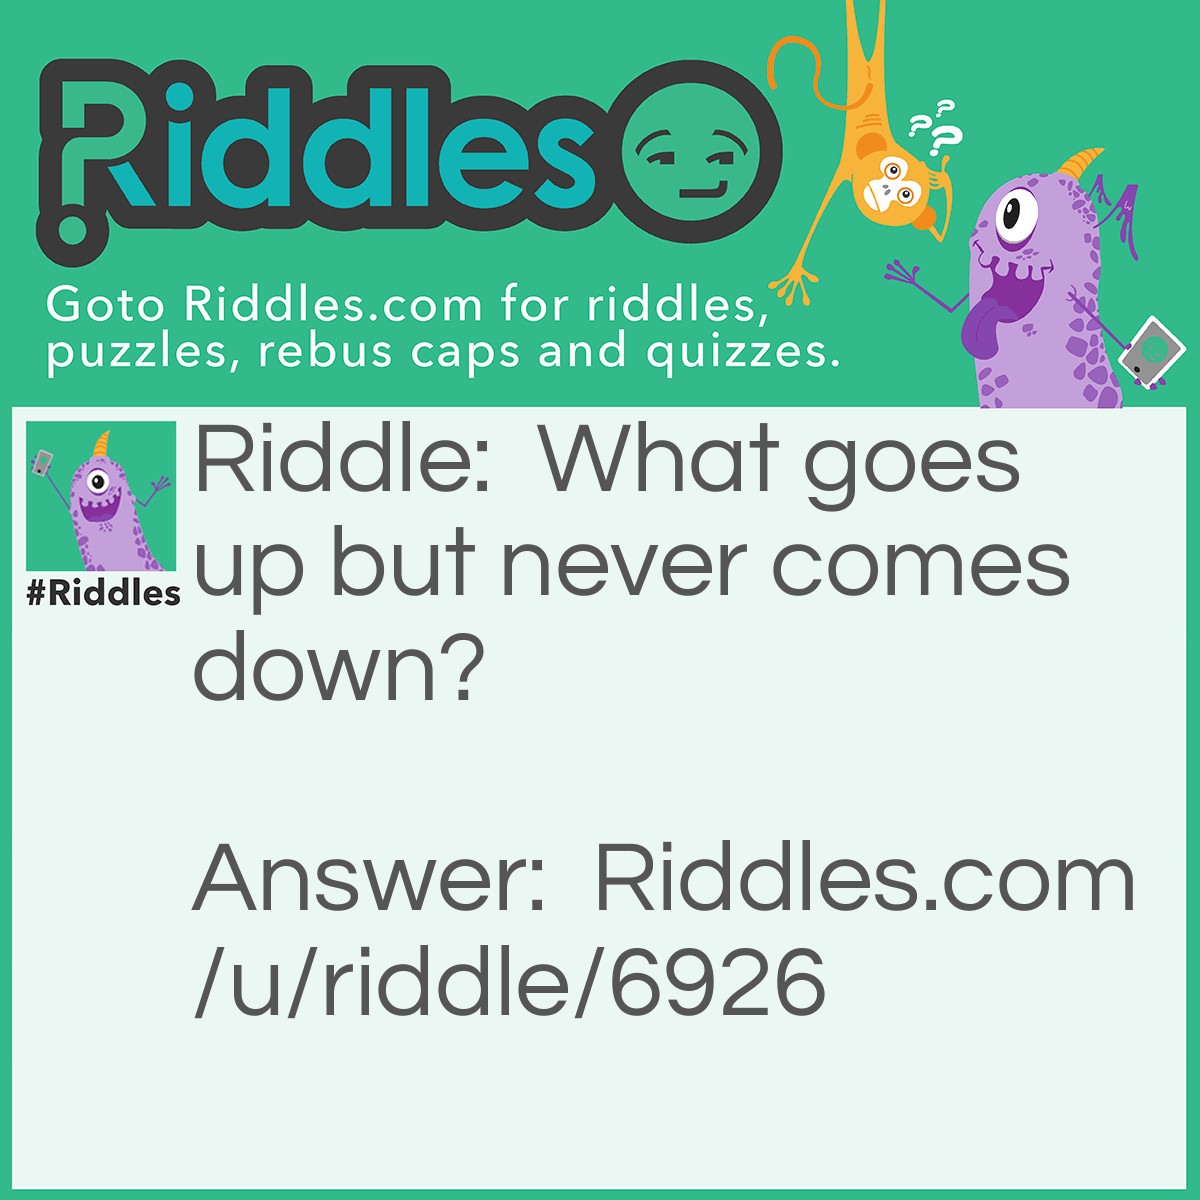 Riddle: What goes up but never comes down? Answer: Your age.